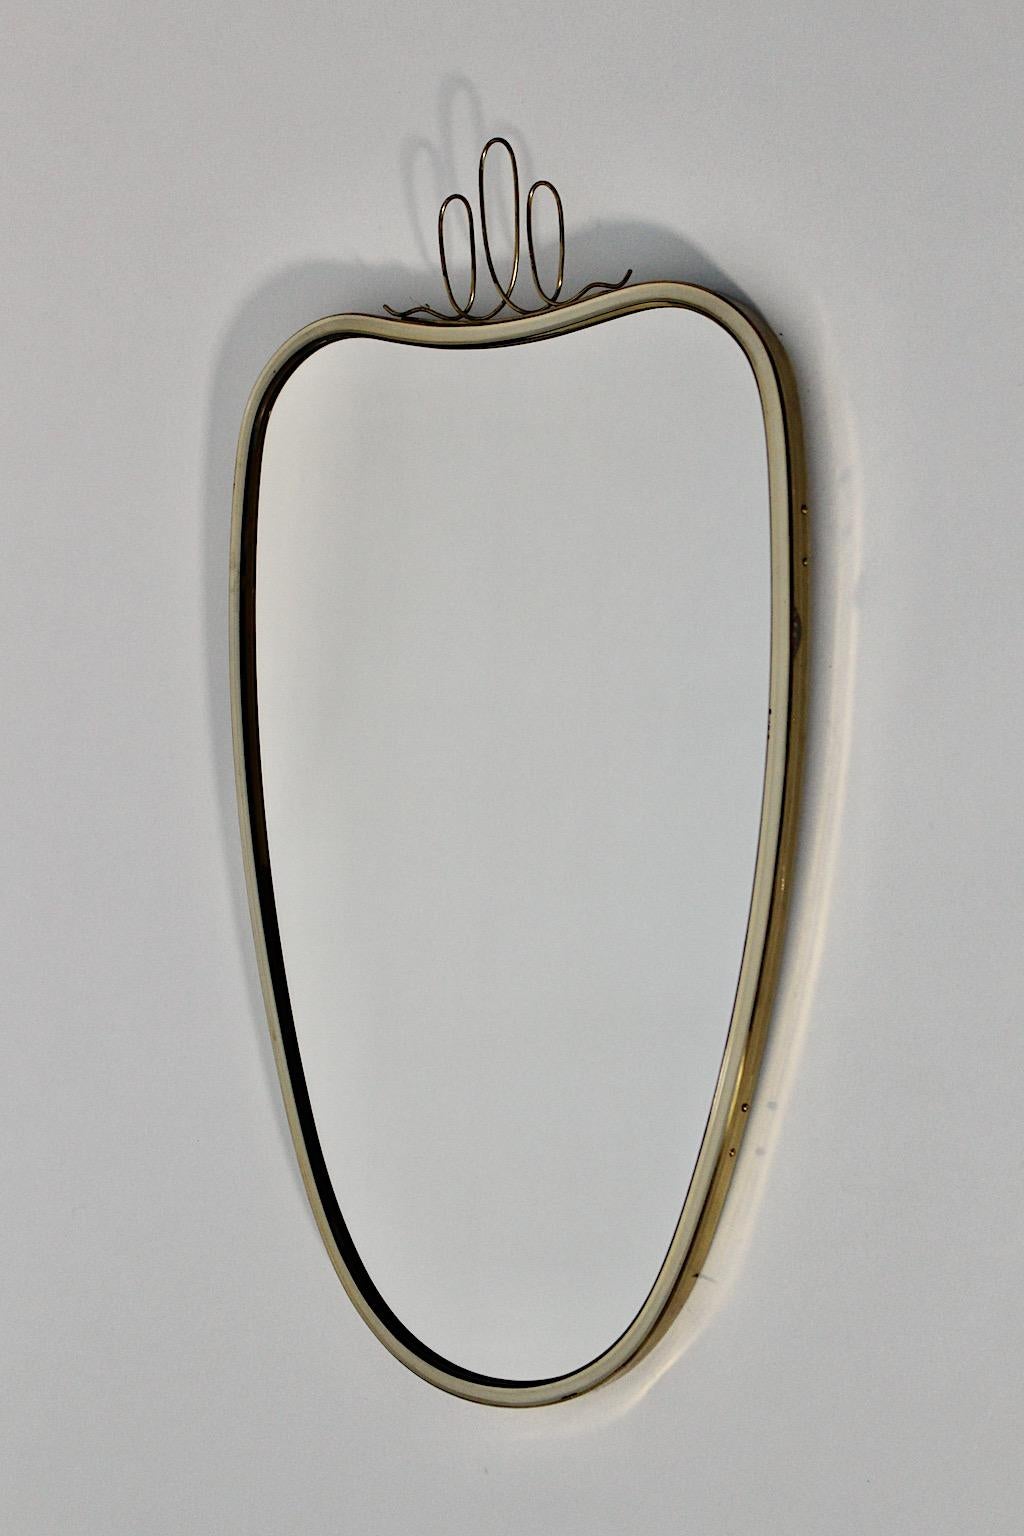 Mid-Century Modern vintage wall mirror white metal frame with brass details heart like 1950s Vienna.
A stunning vintage wall mirror heart like framed from white metal with 3 delicate loops from brass and mirror glass.
While the mirror glass is